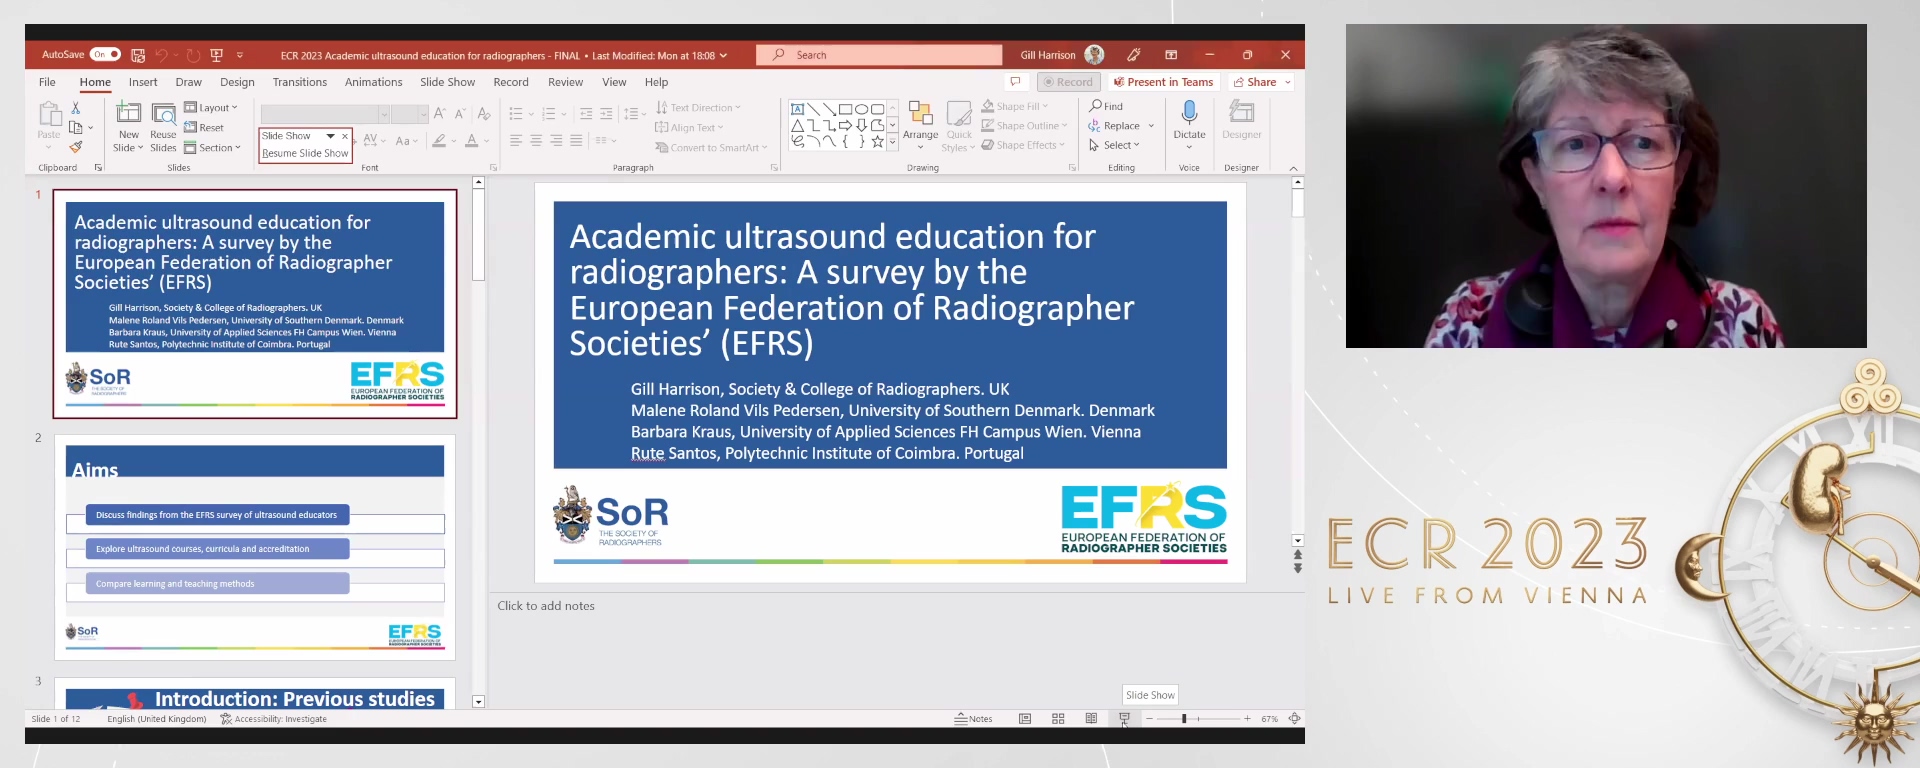 Academic ultrasound education for radiographers: a survey by the European Federation of Radiographer Societies’ (EFRS)